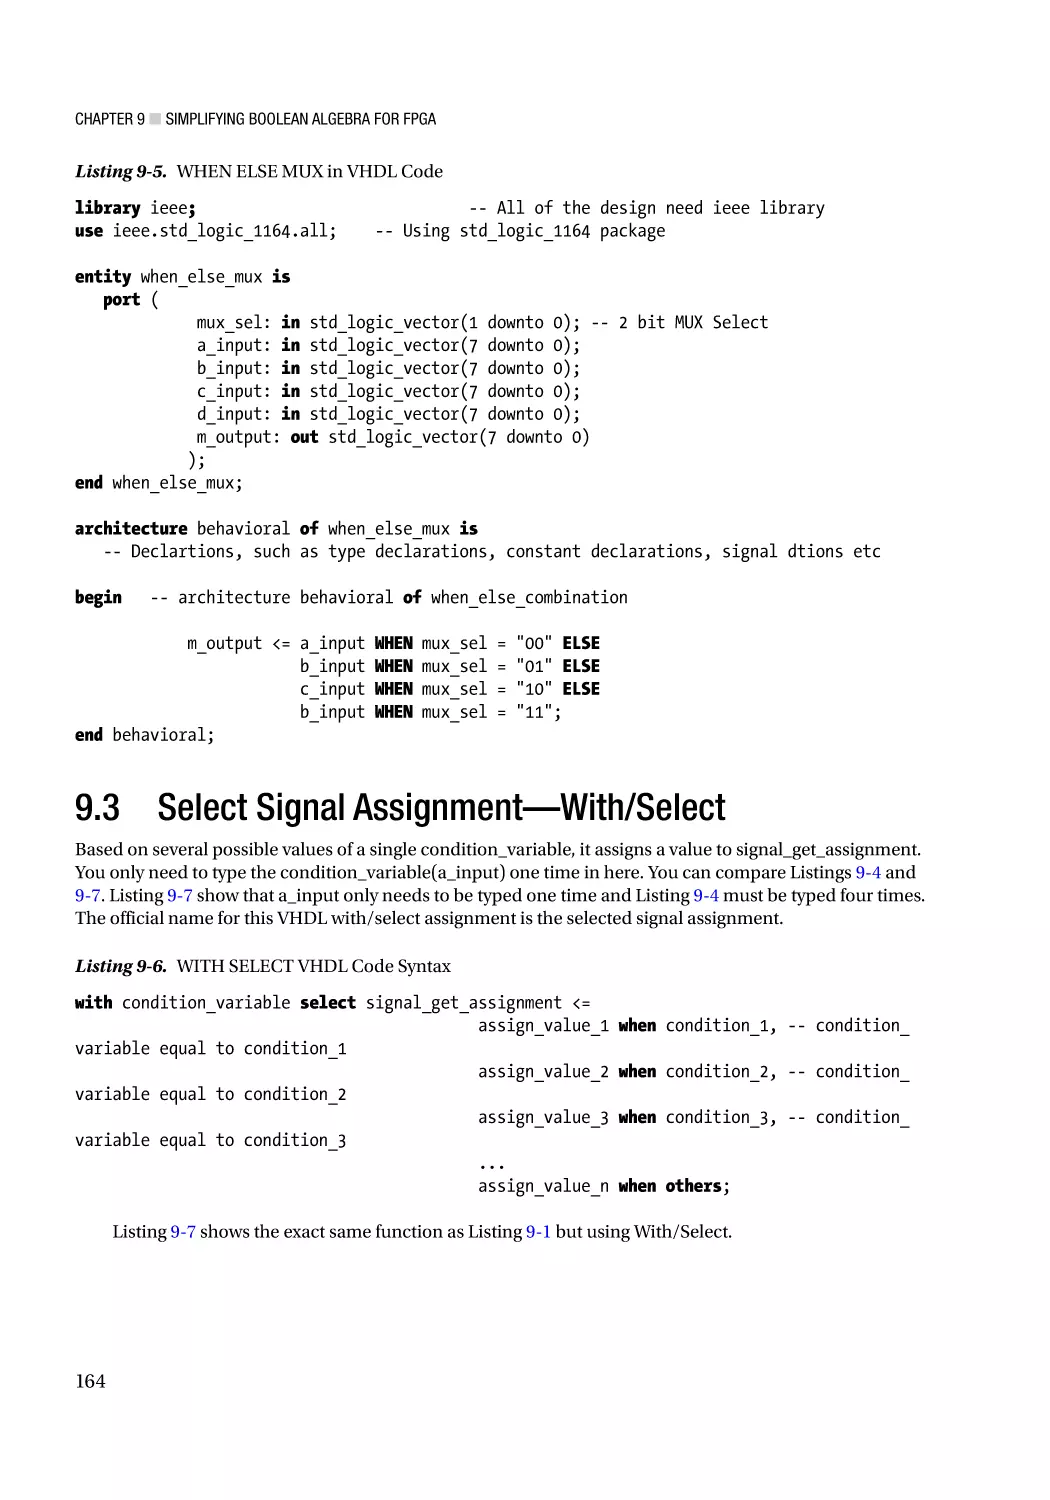 9.3 Select Signal Assignment—With/Select